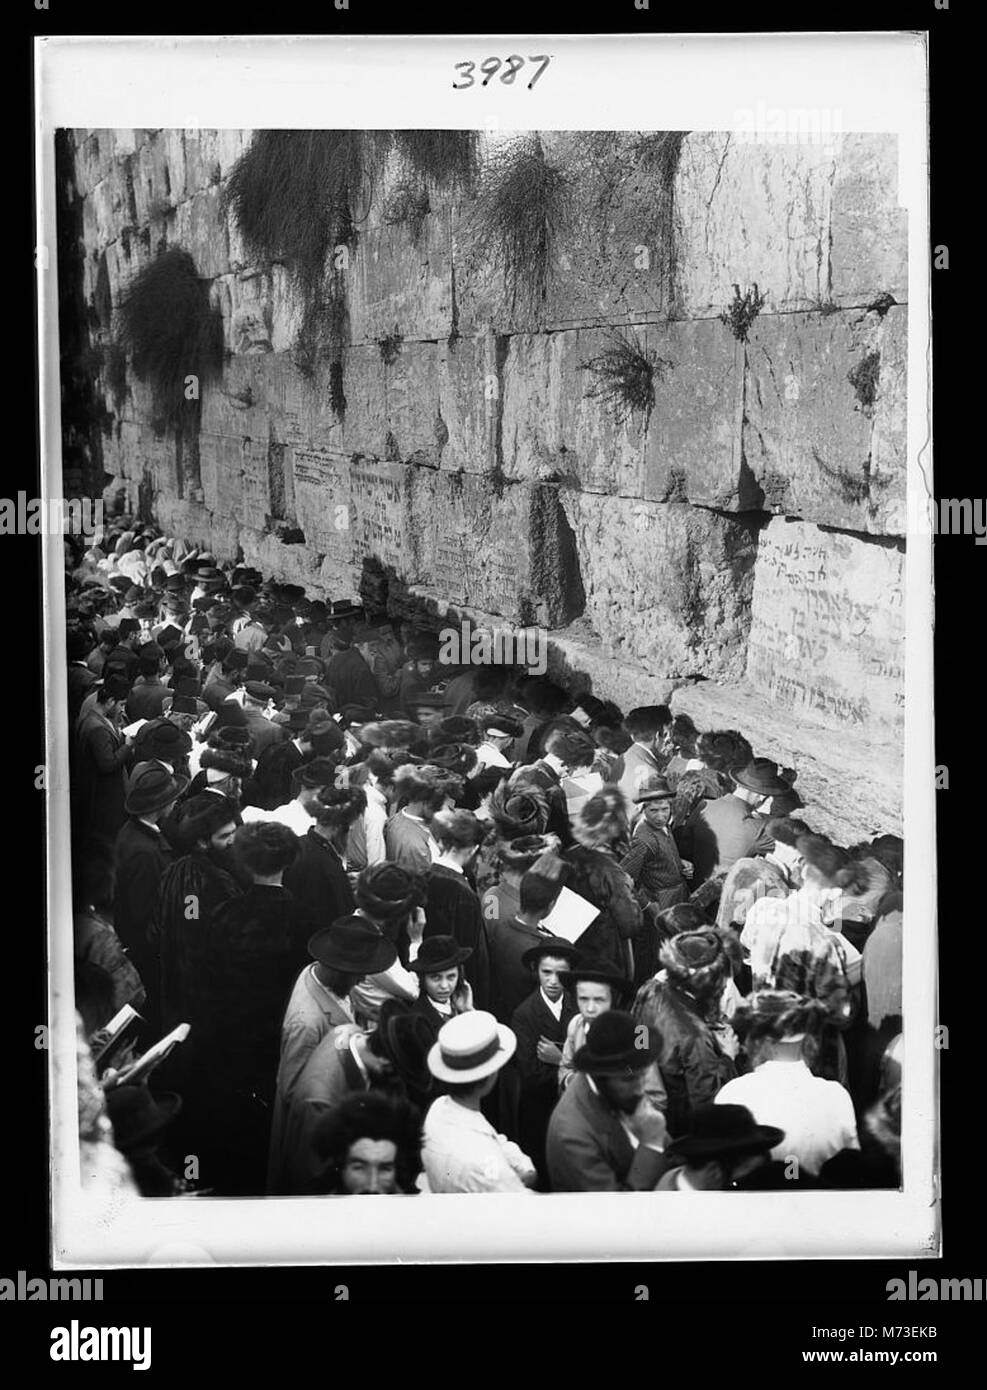 Crowds on Atonement Day at Western Temple Wall. Jew's wailing place LOC matpc.12190 Stock Photo